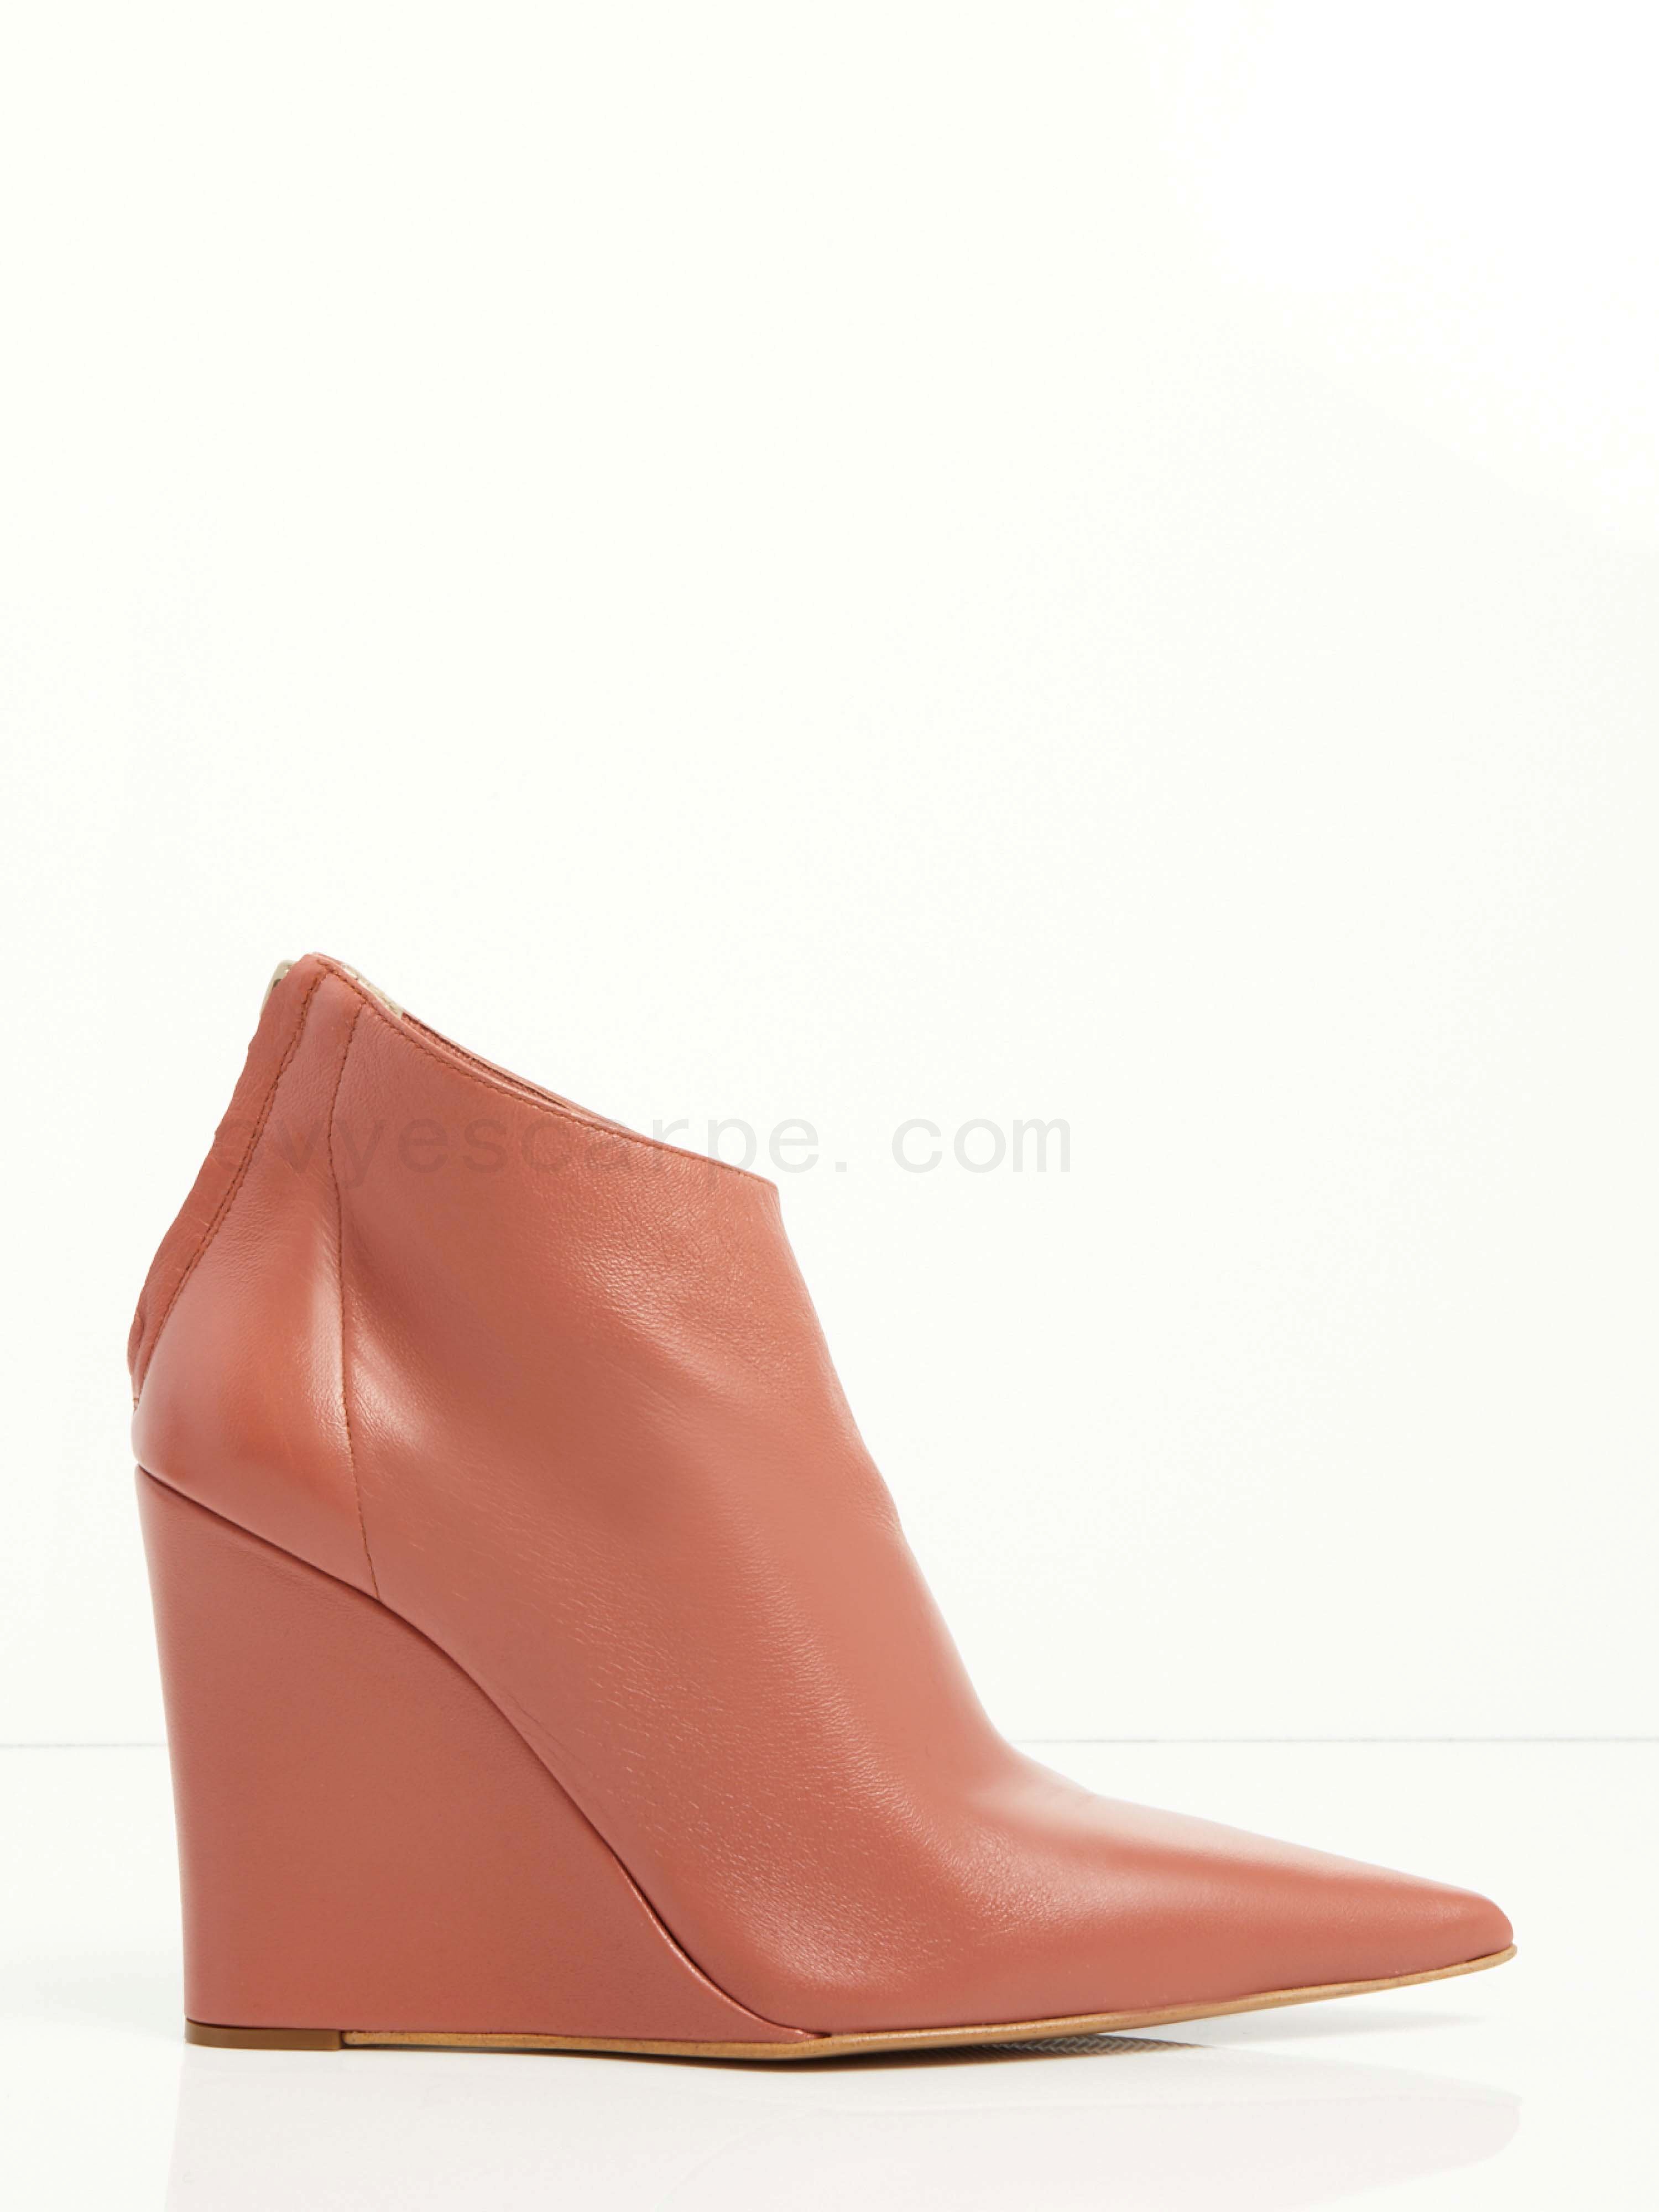 Wedge Leather Ankle Boots F08161027-0470 Fino Al -80%